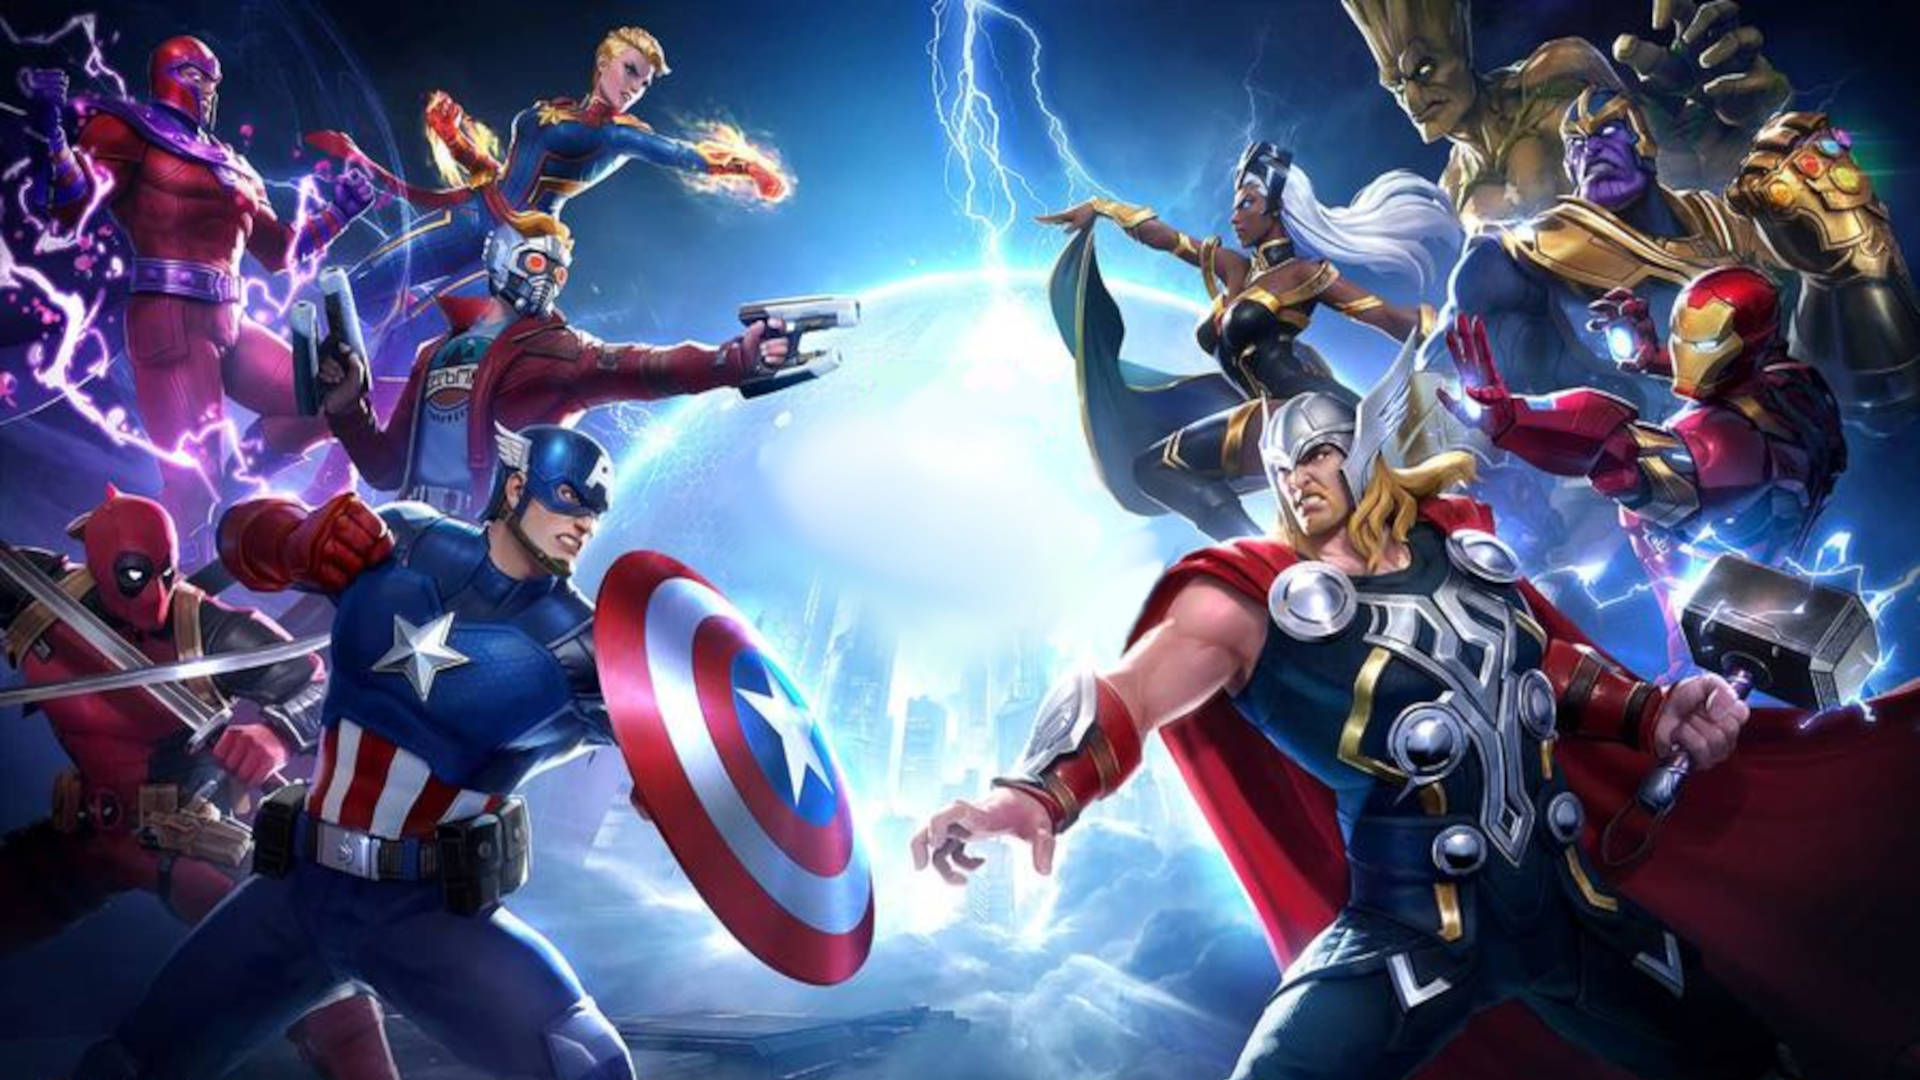 Marvel Super War is now available in Australia and New Zealand